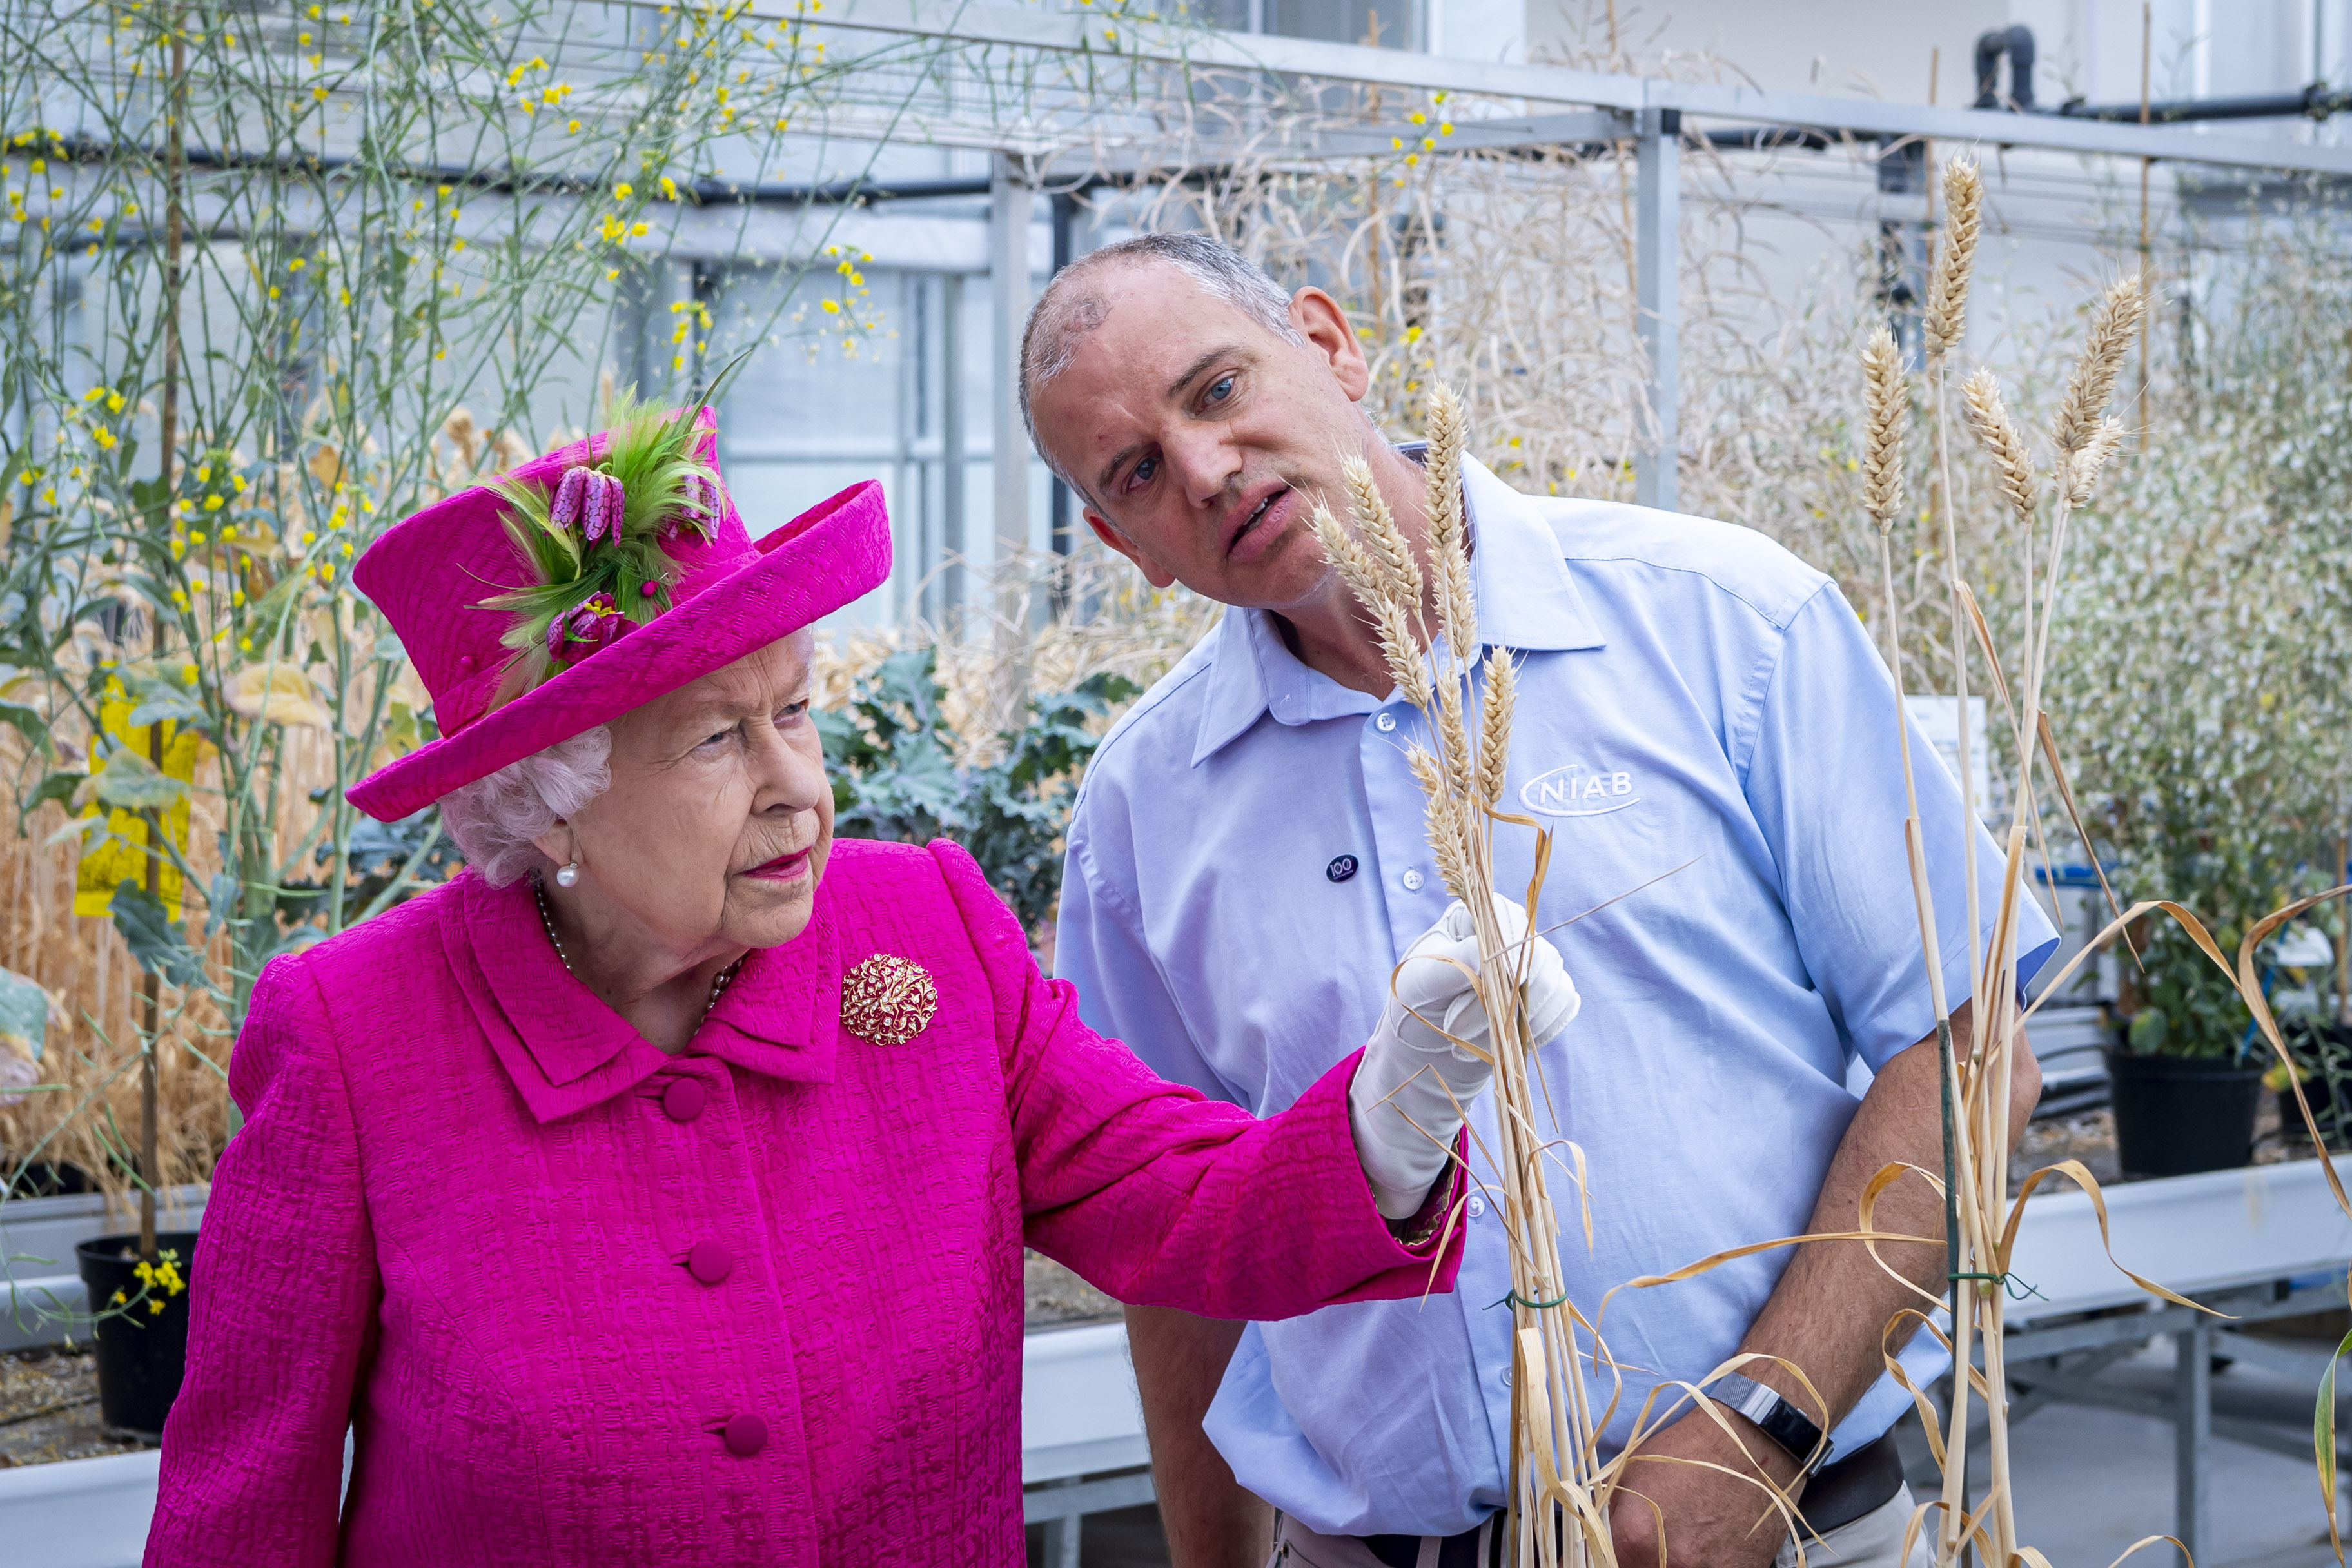 NIAB's Dr Phil Howell shows The Queen some wheat in the NIAB glasshouses